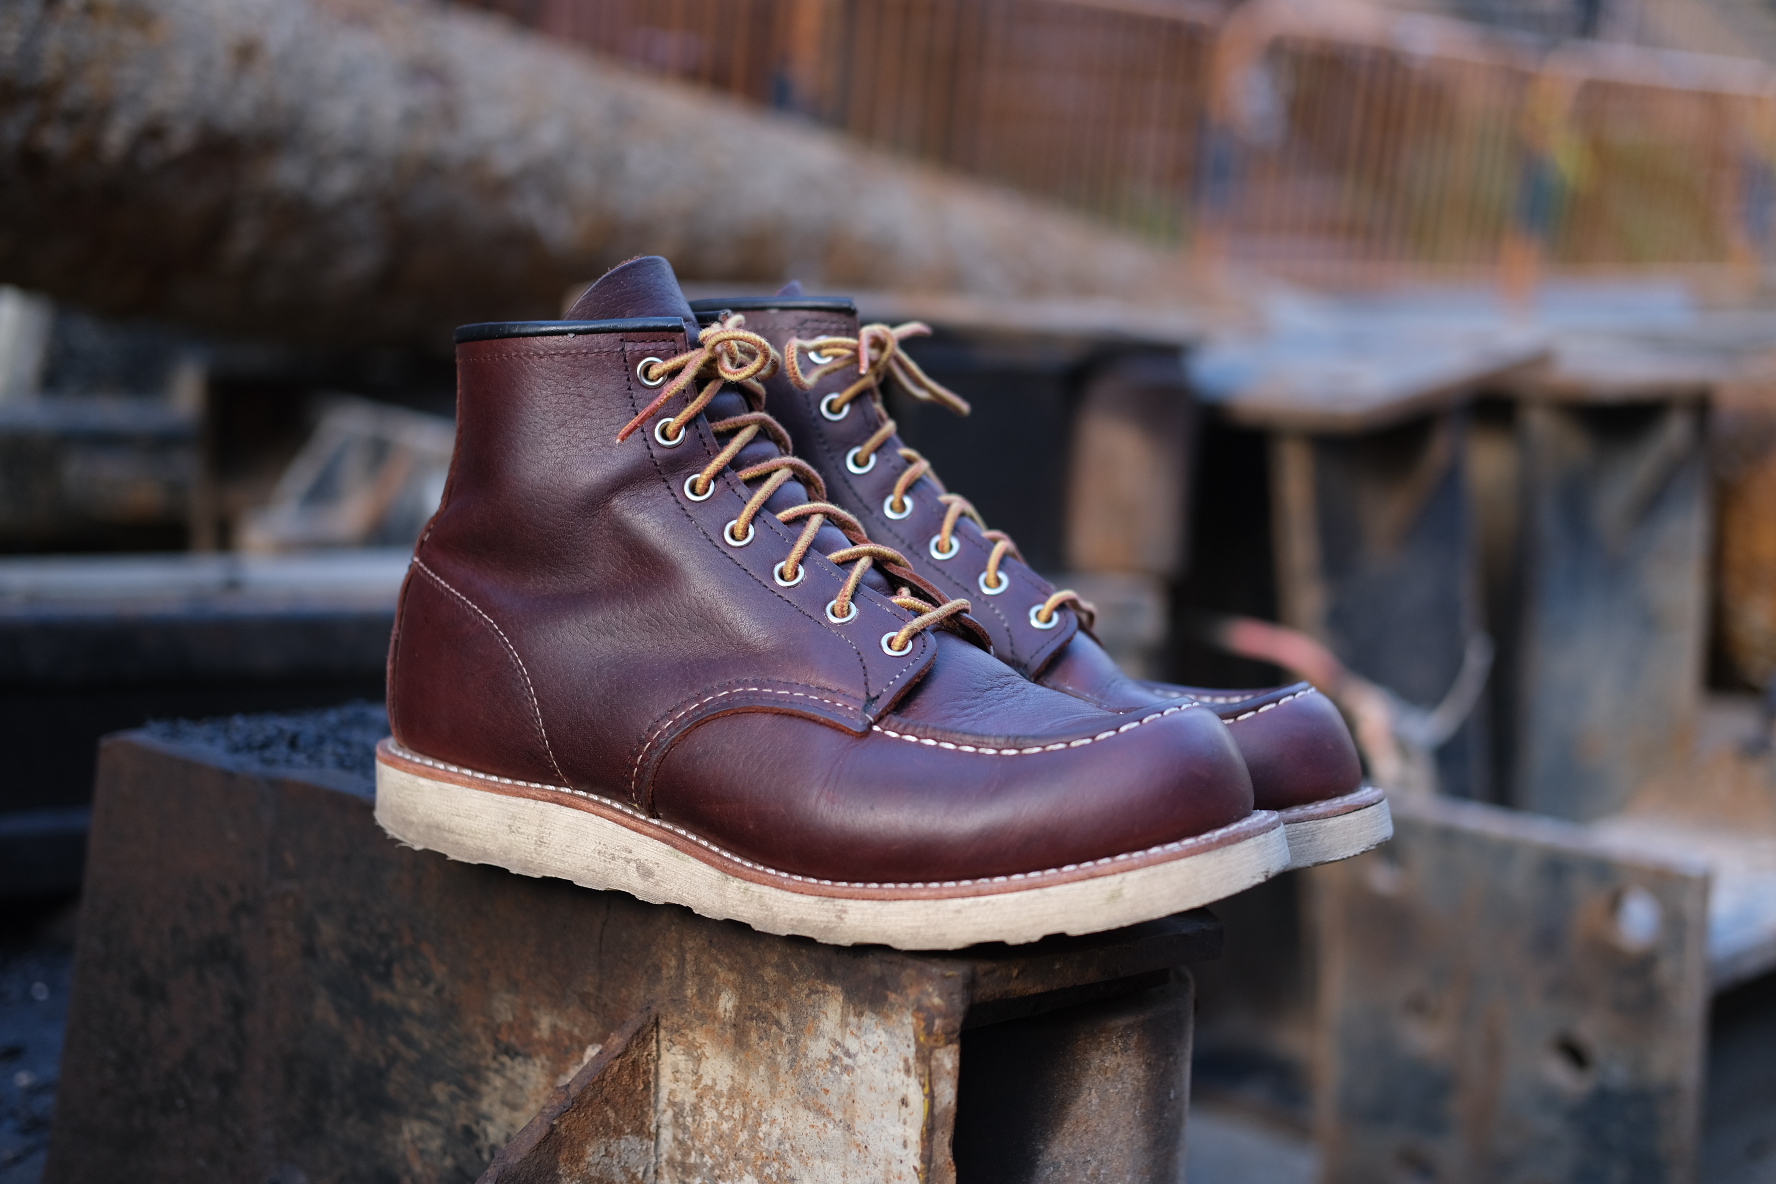 red wing boots moc toe